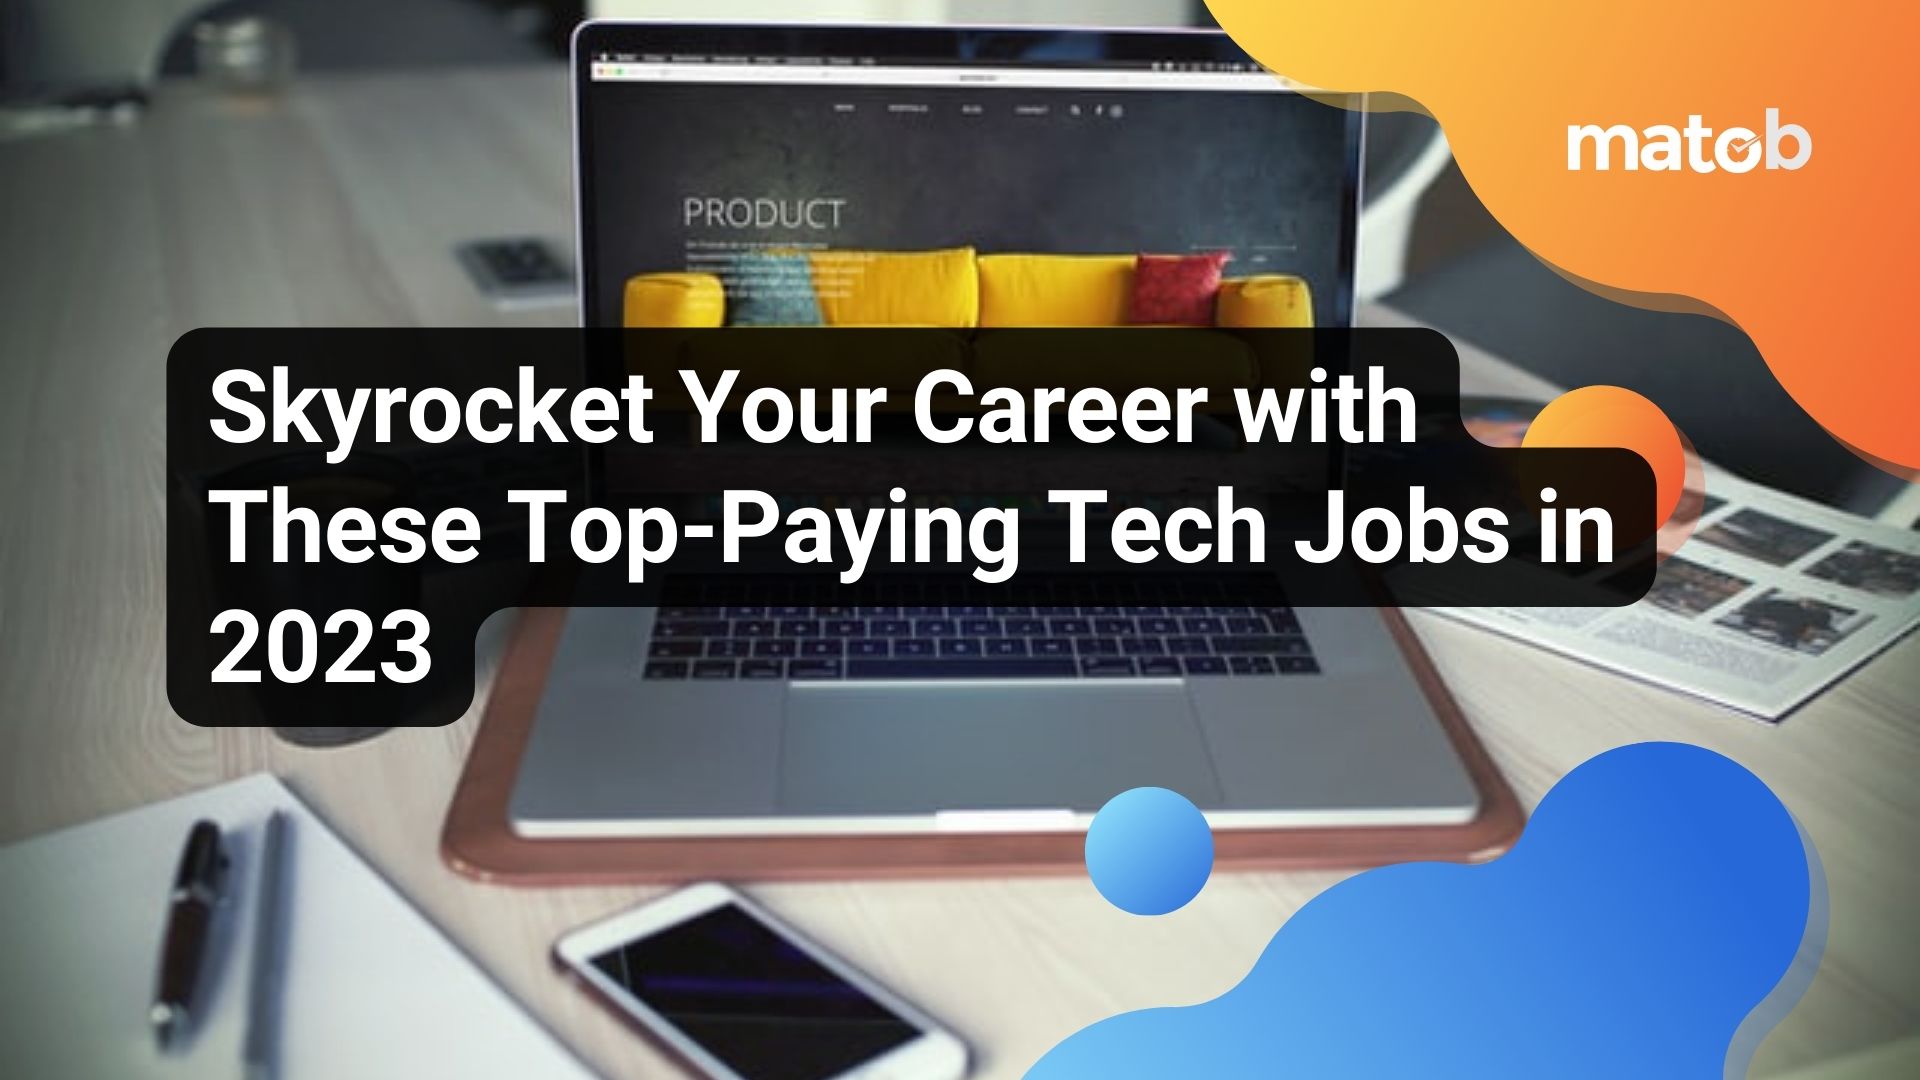 Skyrocket Your Career with These Top-Paying Tech Jobs in 2023